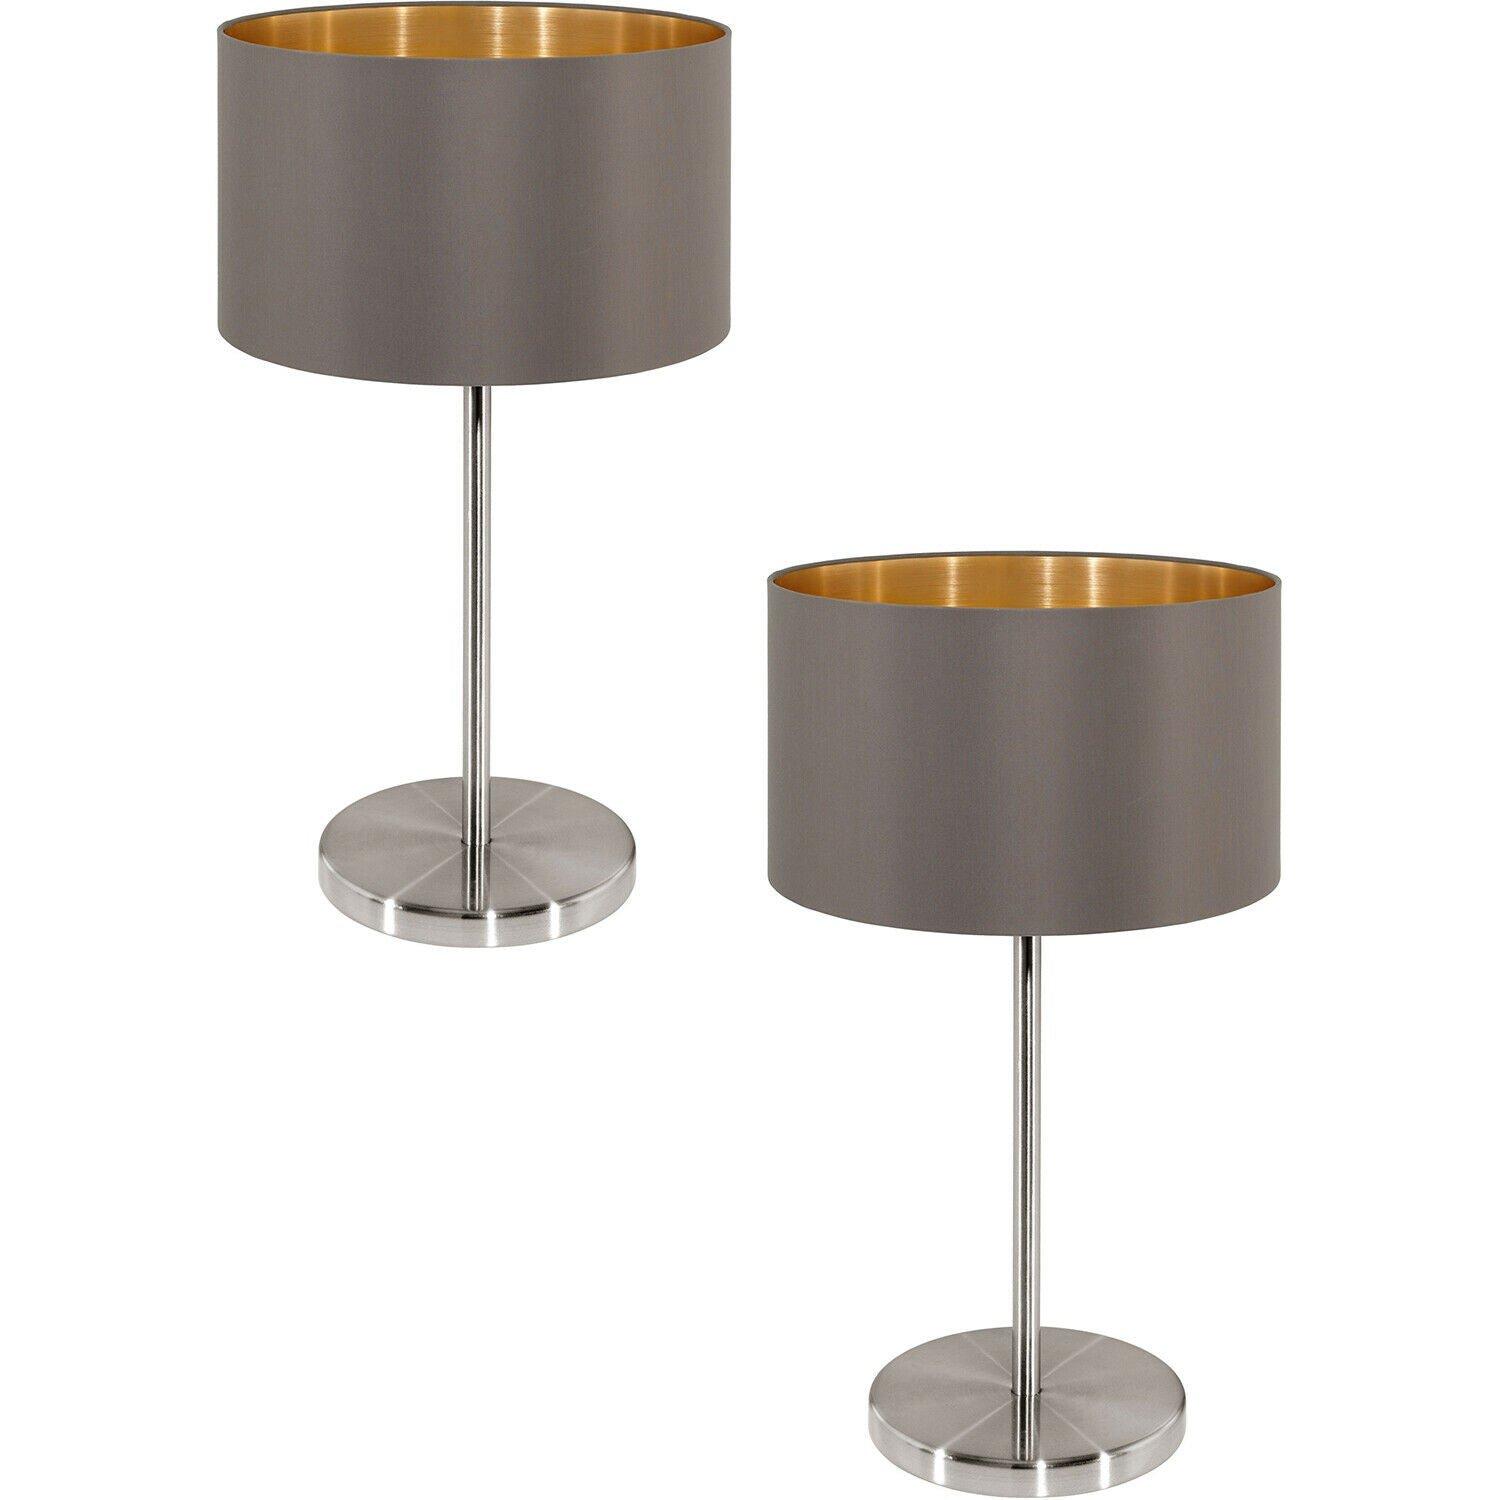 2 PACK Table Lamp Colour Satin Nickel Shade Cappuccino Gold Fabric E27 1x60W